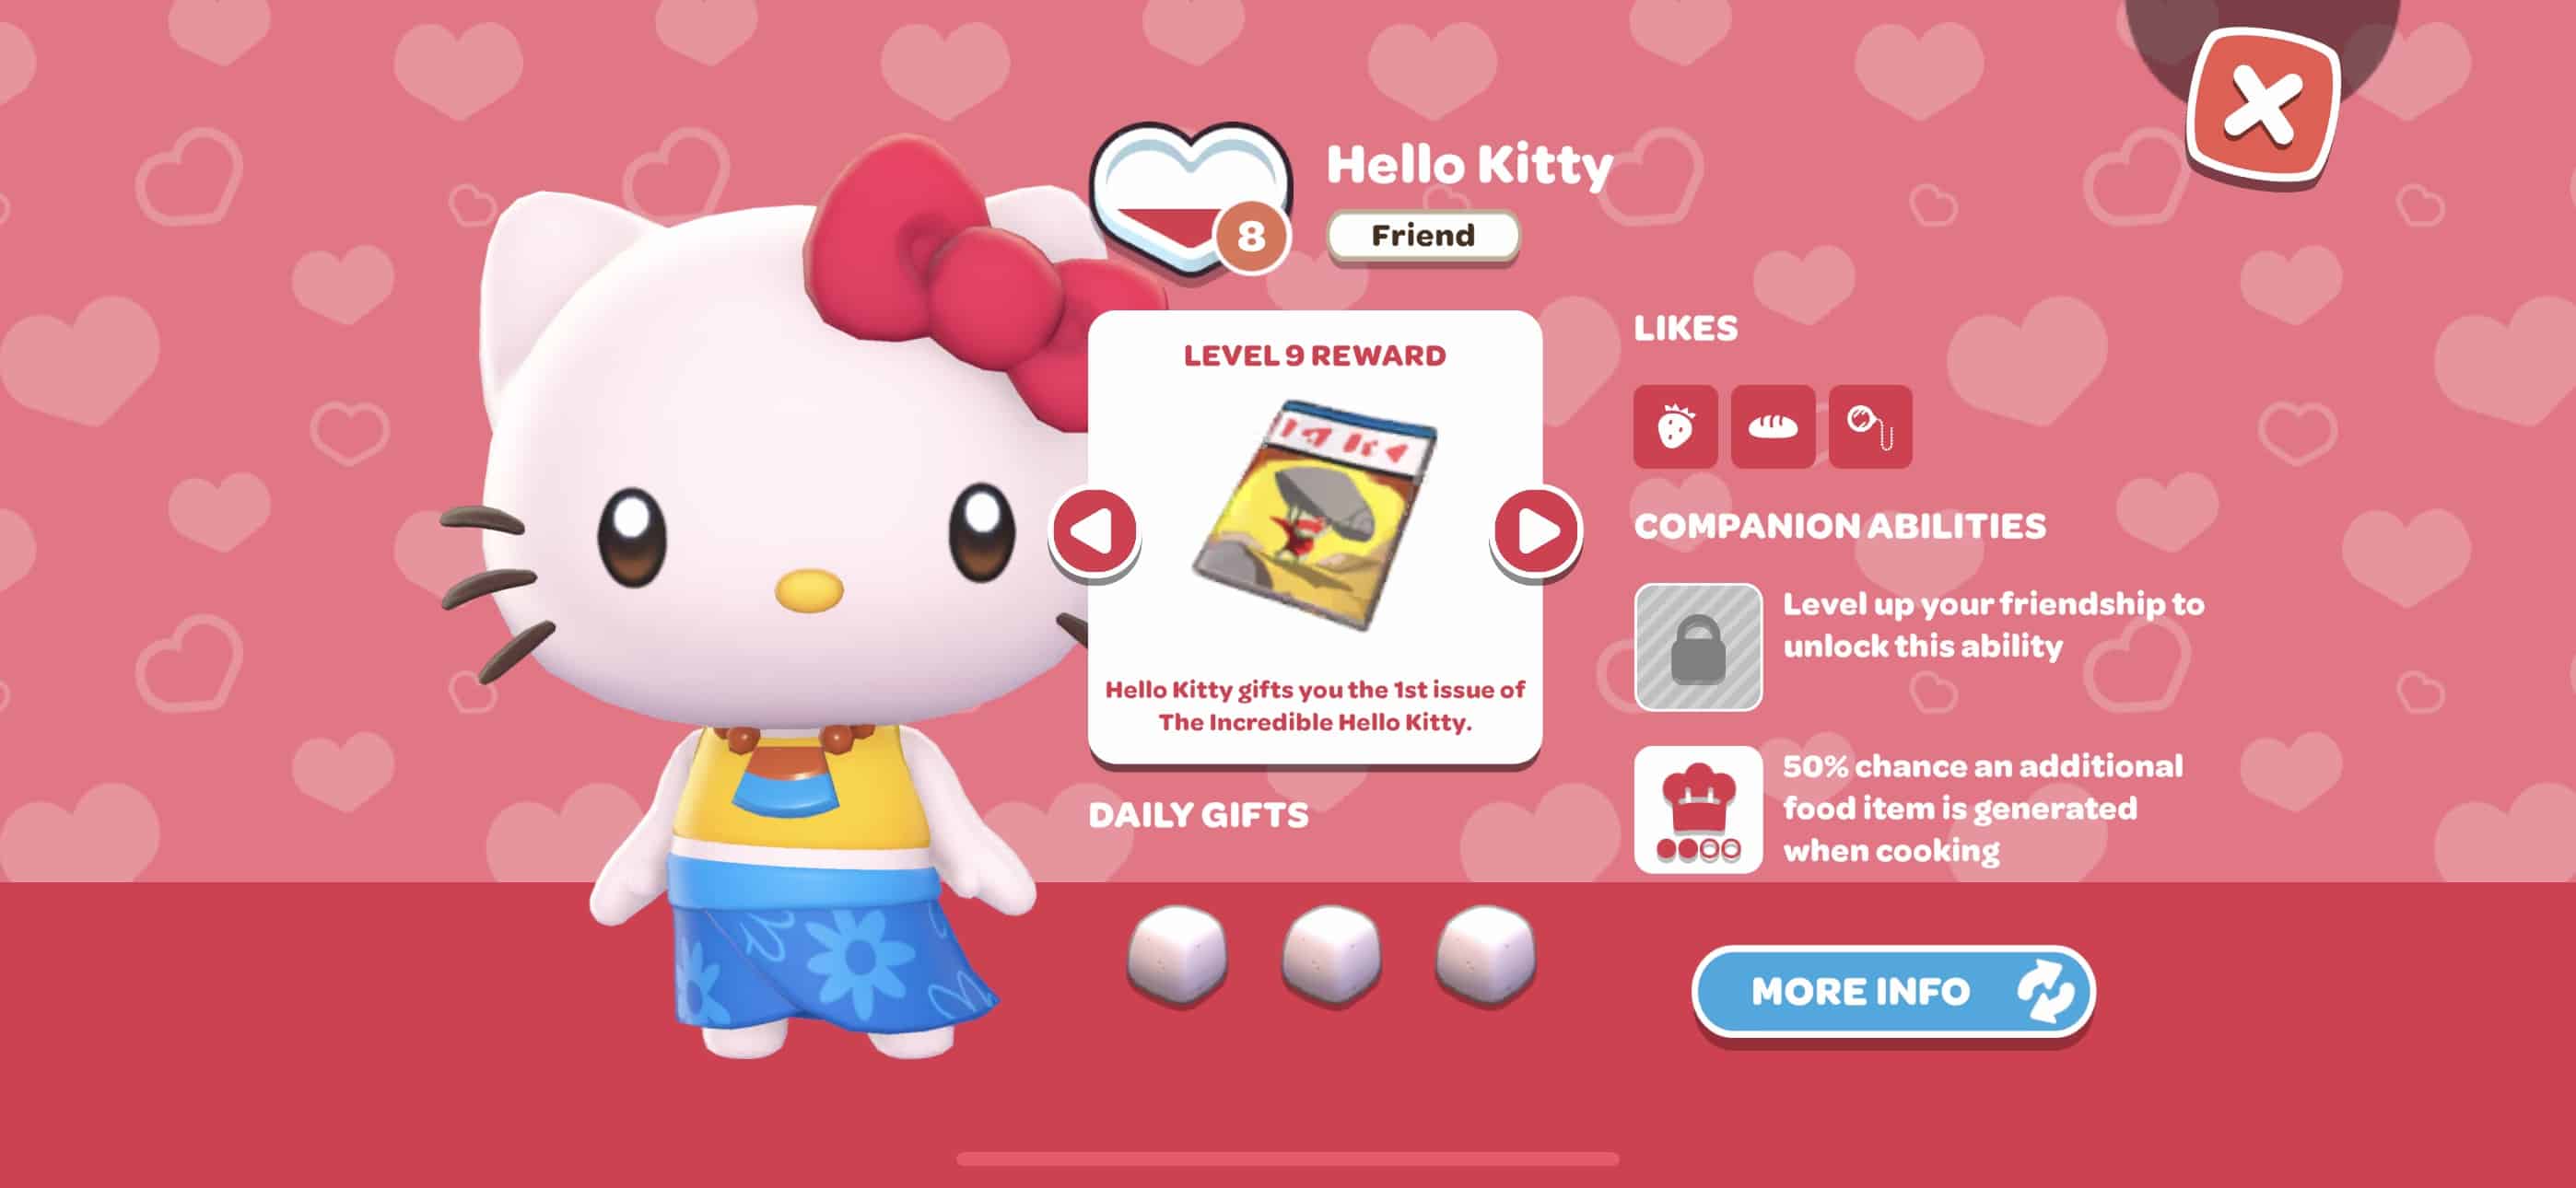 Hello Kitty Island Adventure – Gift and Friendship Guide